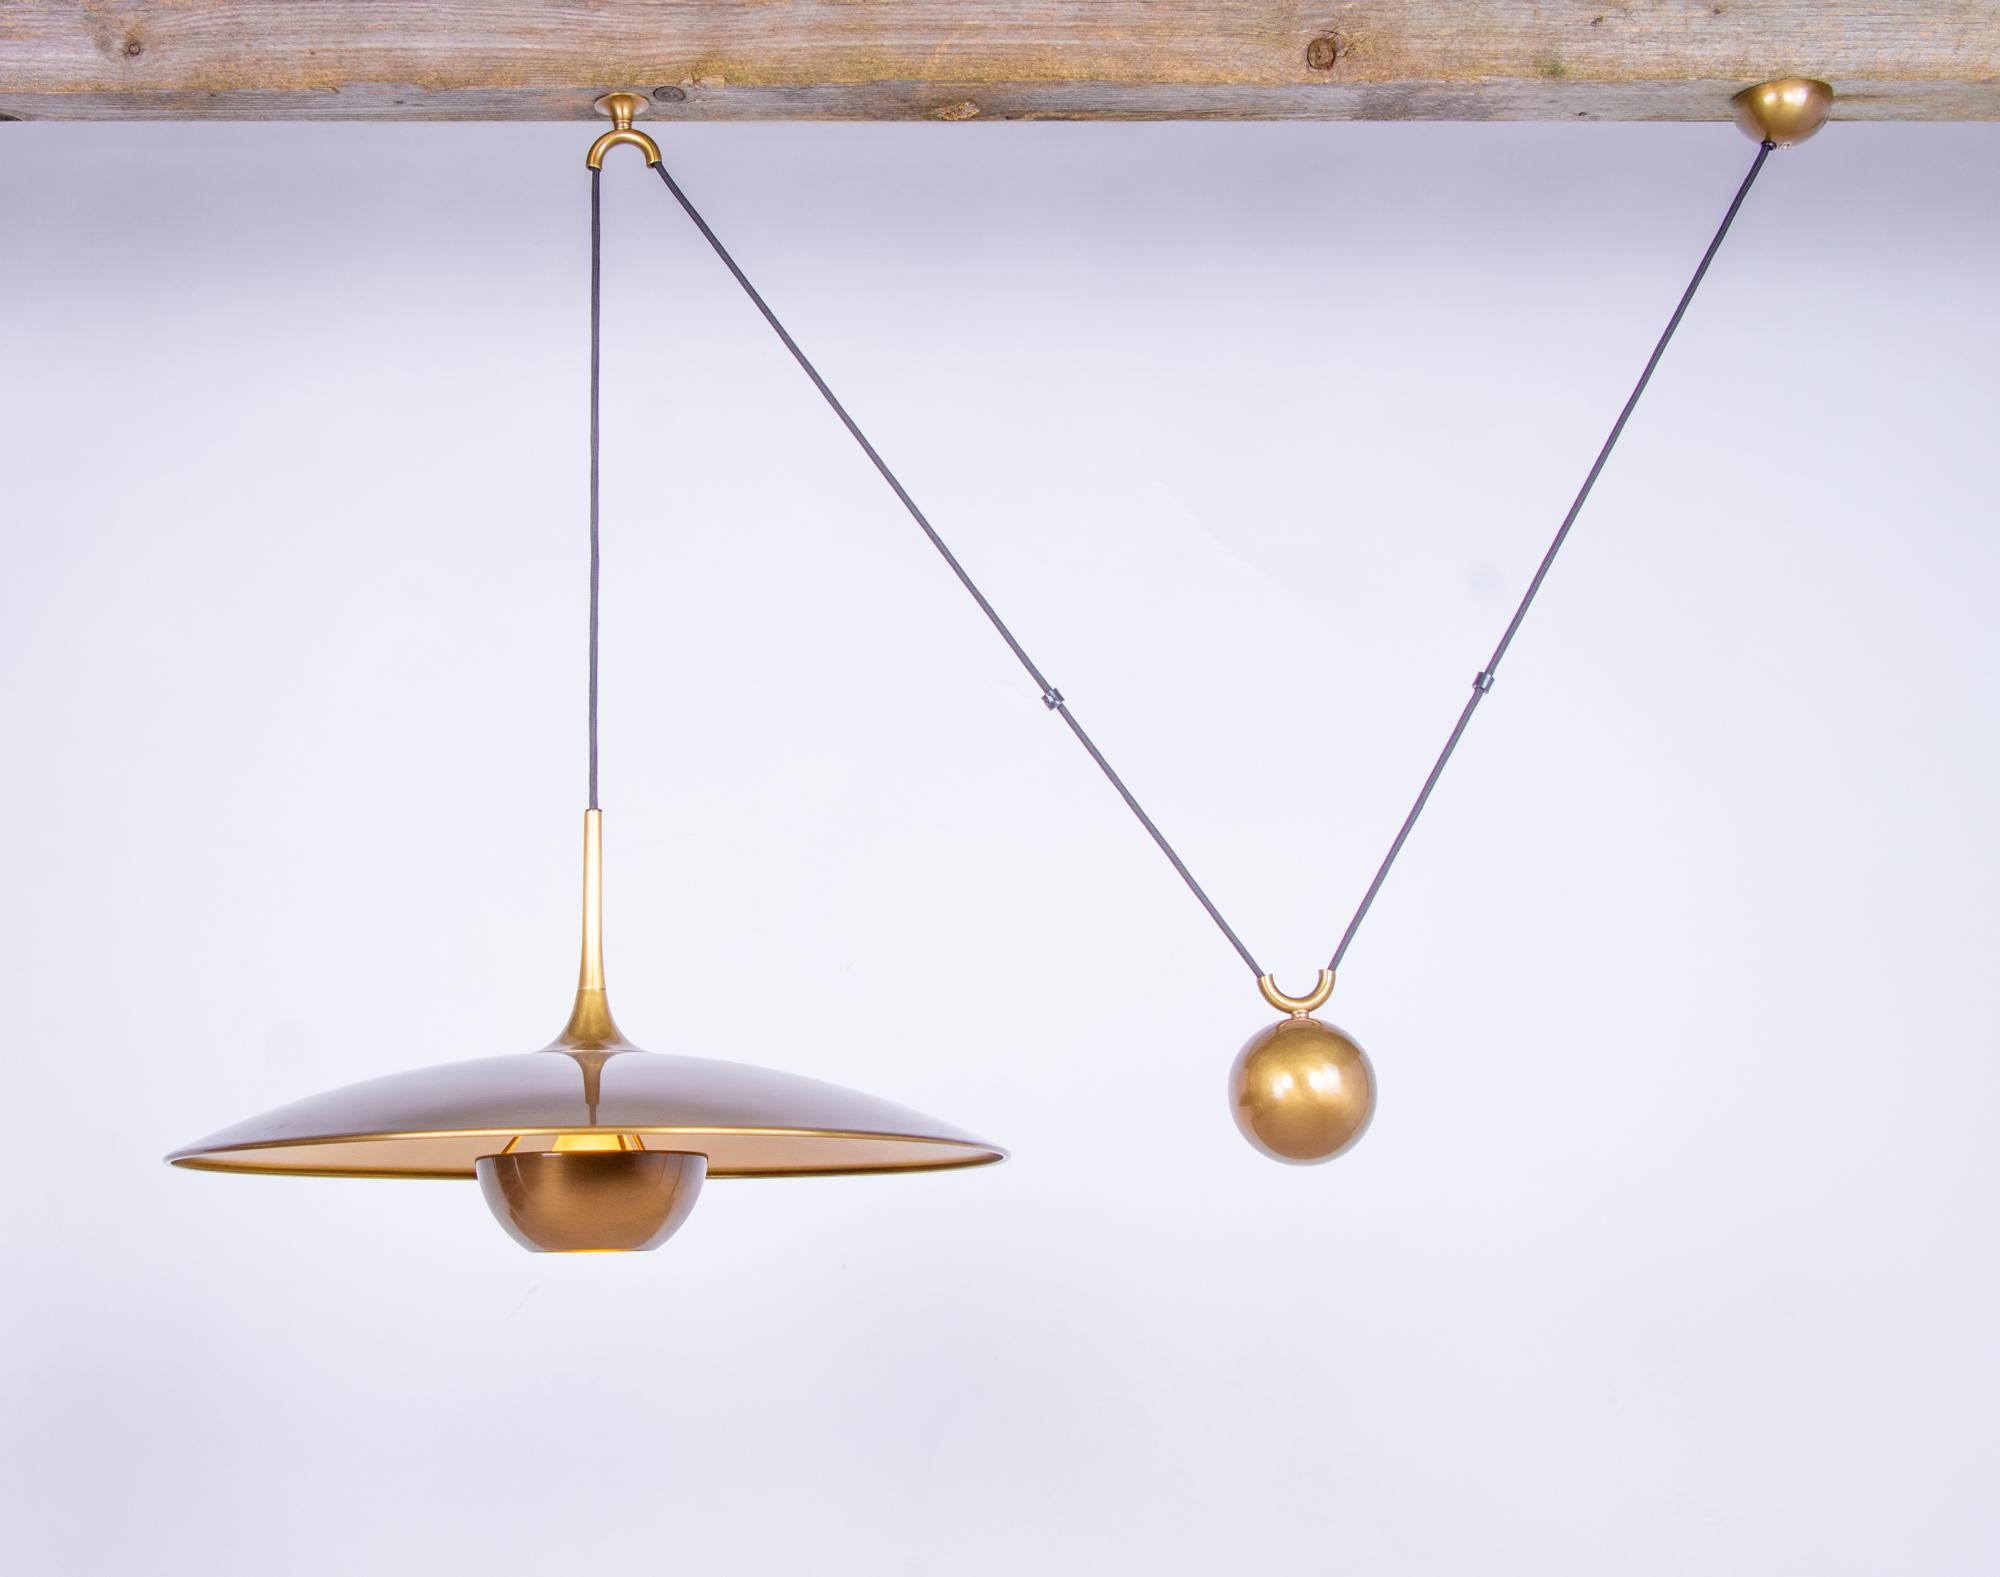 Adjustable Brass Pendant Lamp Onos 55 by Florian Schulz, Germany, 1970s For Sale 2